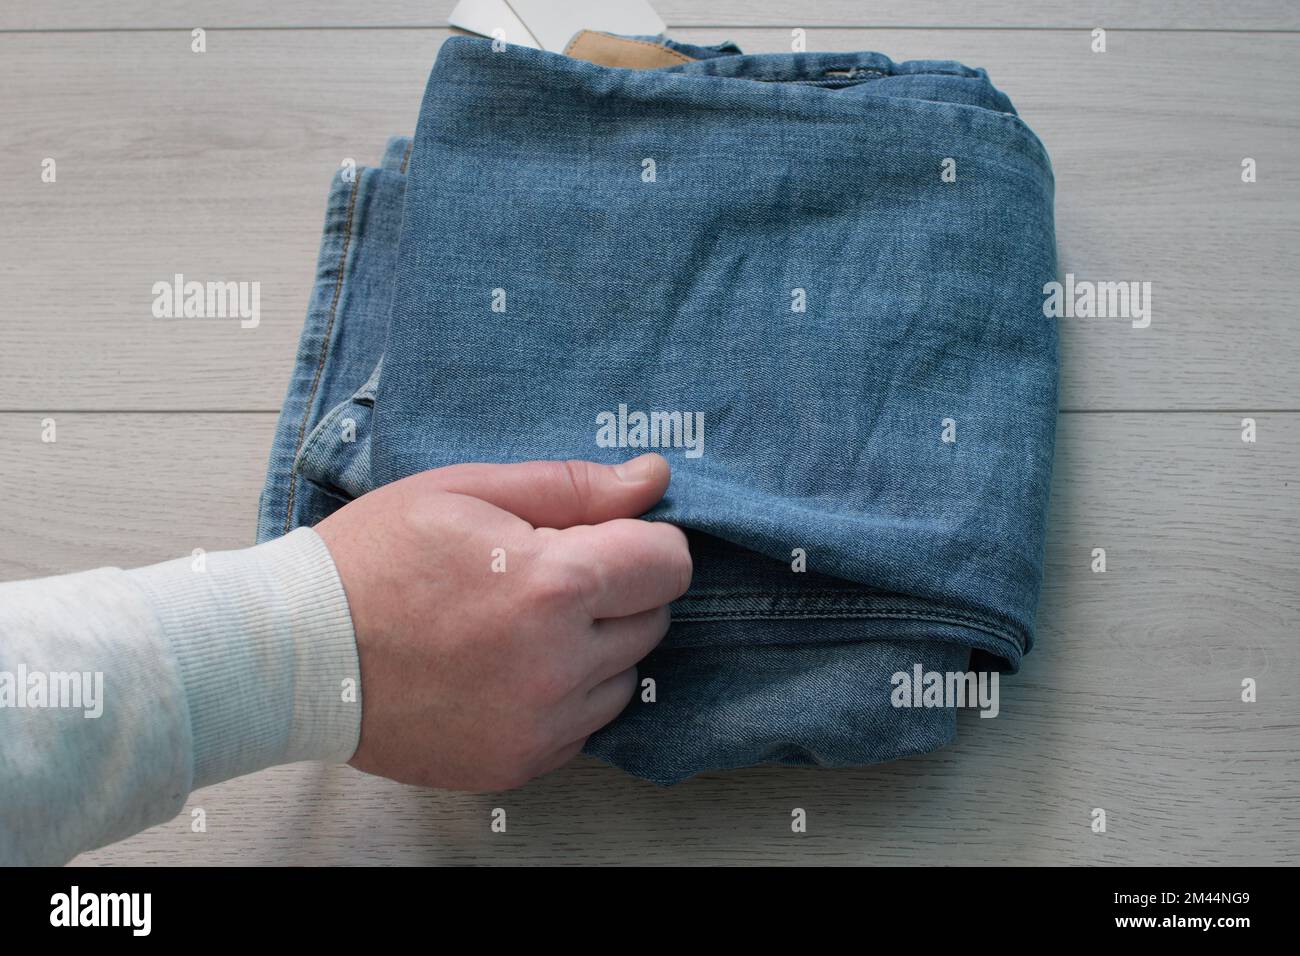 Check the stuff. The buyer checks the quality of the denim pants Stock Photo